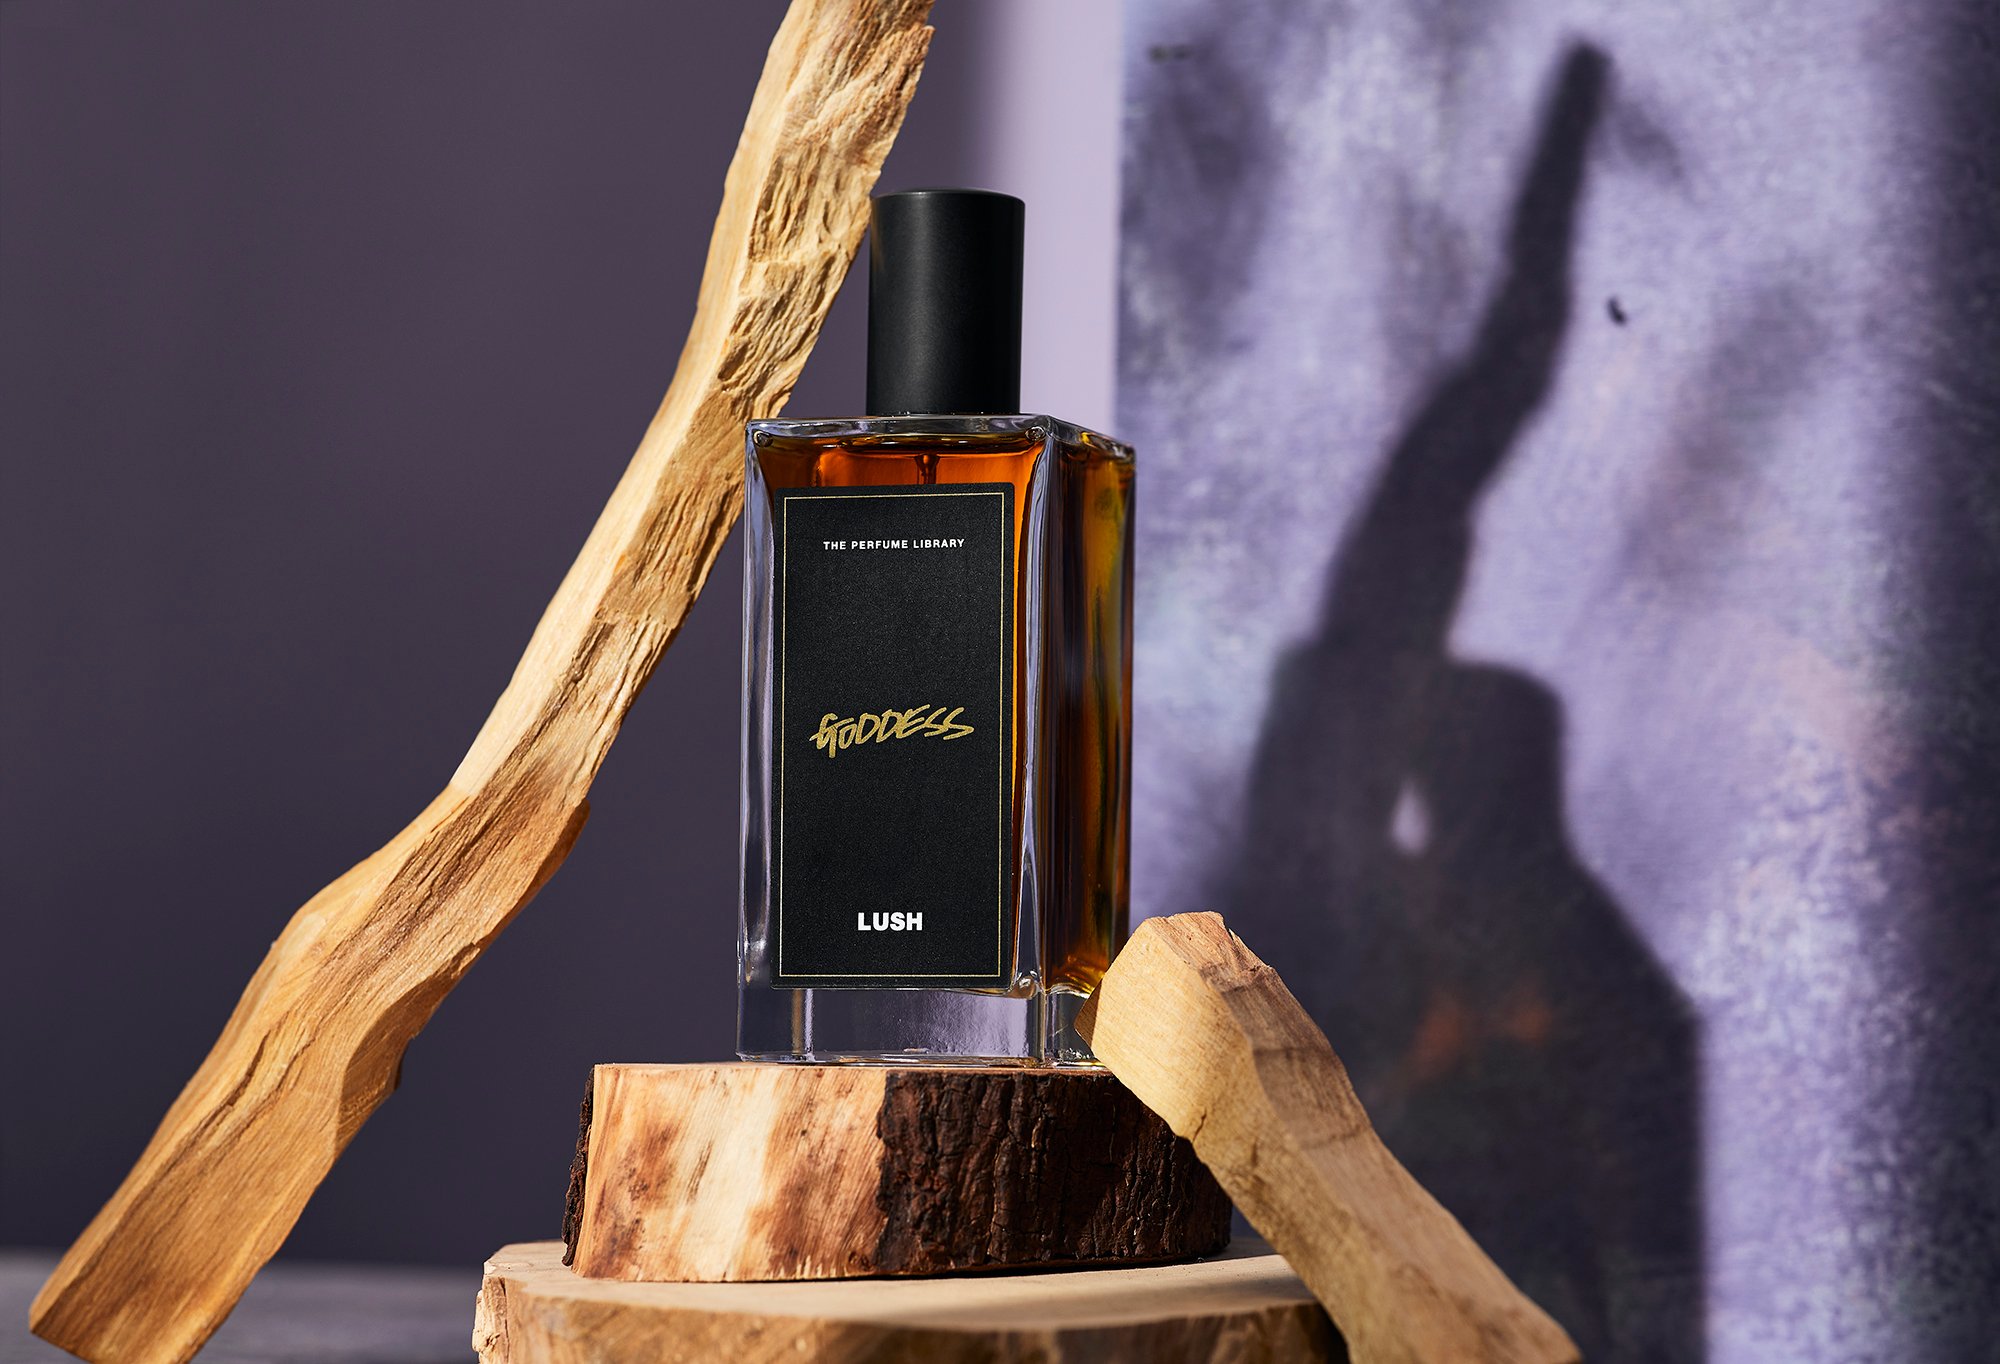 A dark amber coloured bottled perfume, Goddess, sits on top of a display of sandalwood, one of it's main ingredients.